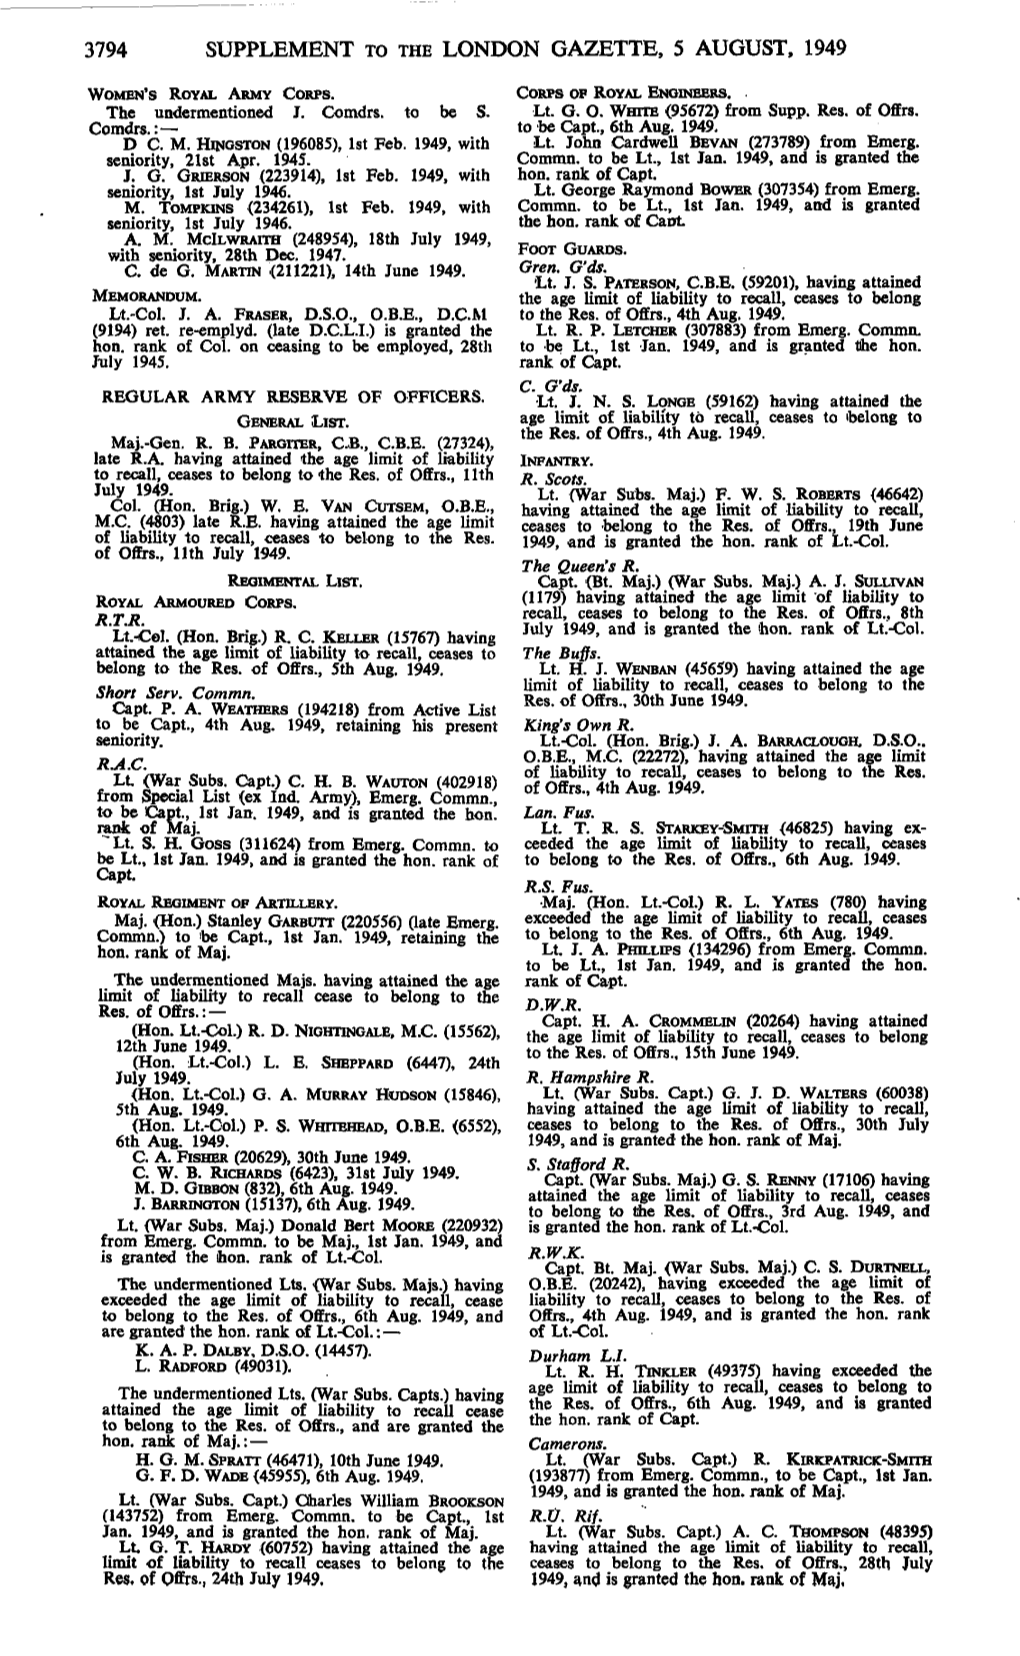 3794 Supplement to the London Gazette, 5 August, 1949